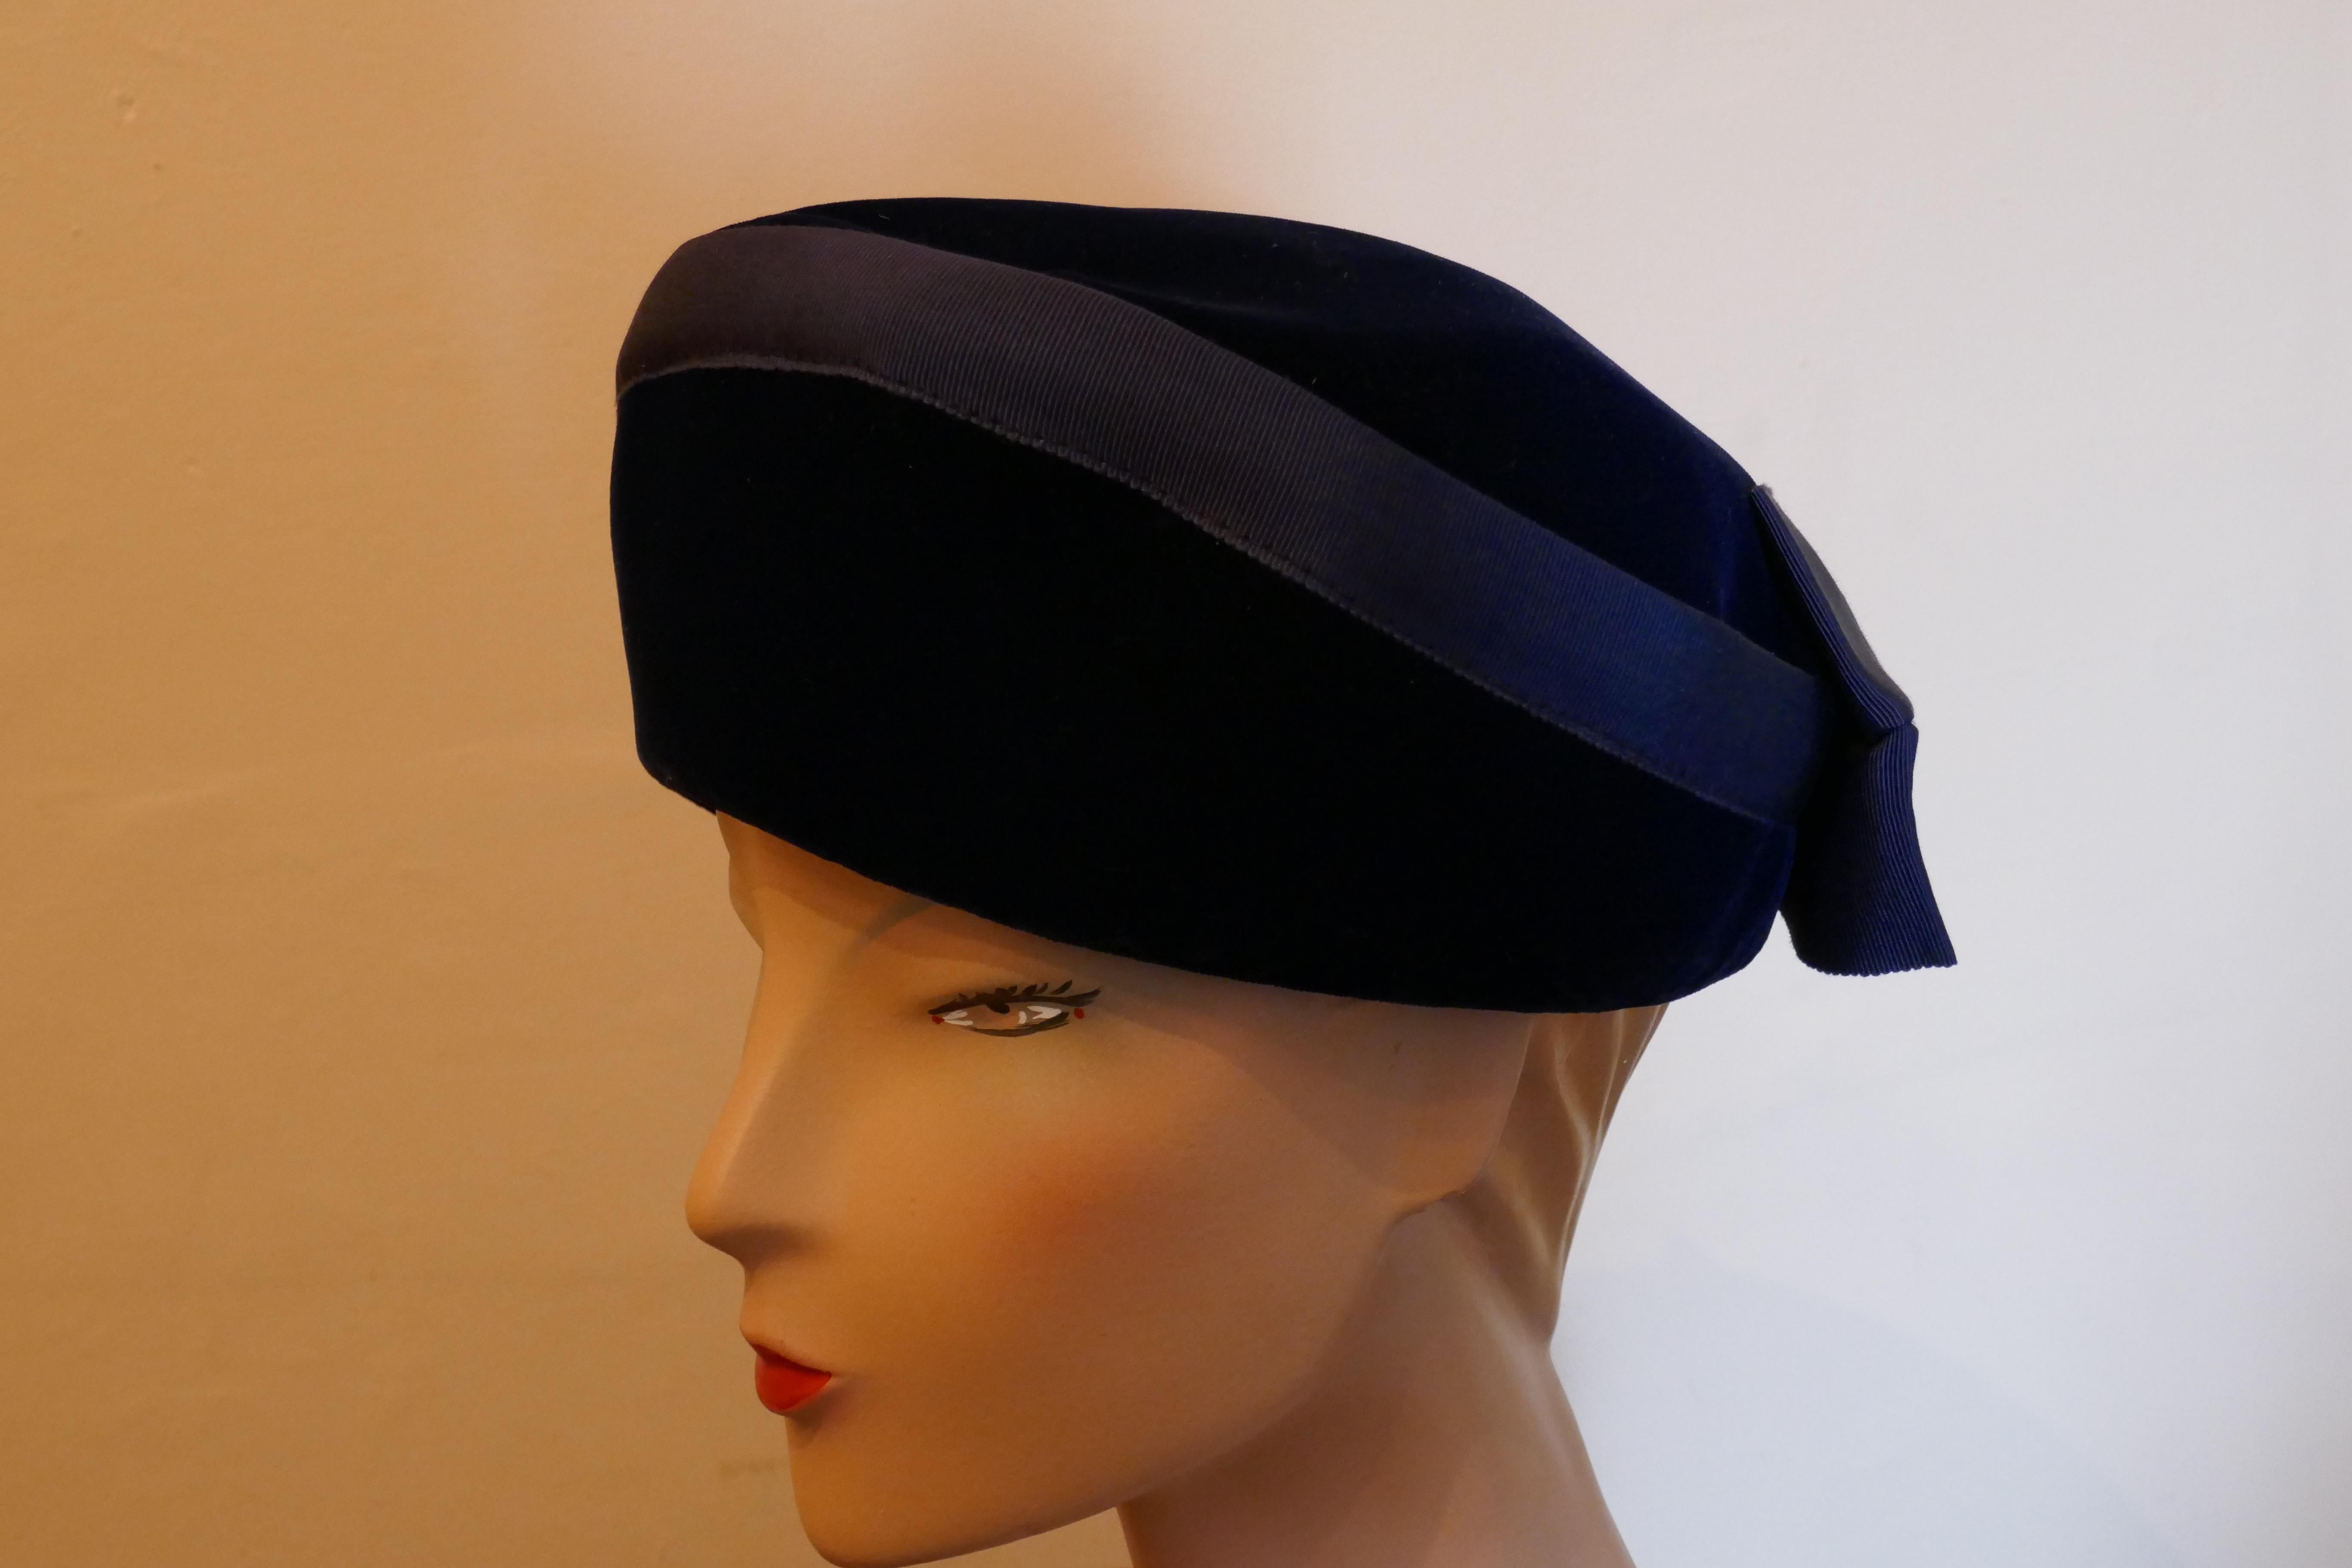 Original 1950s Deep Blue Plush Velvet Pill Box Hat

Stunning classic pill box hat, in plush velvet, trimmed with a Bow at the back
The Hat is in good condition, satin lined and measures 57cm around the band
The hat is top quality and will come